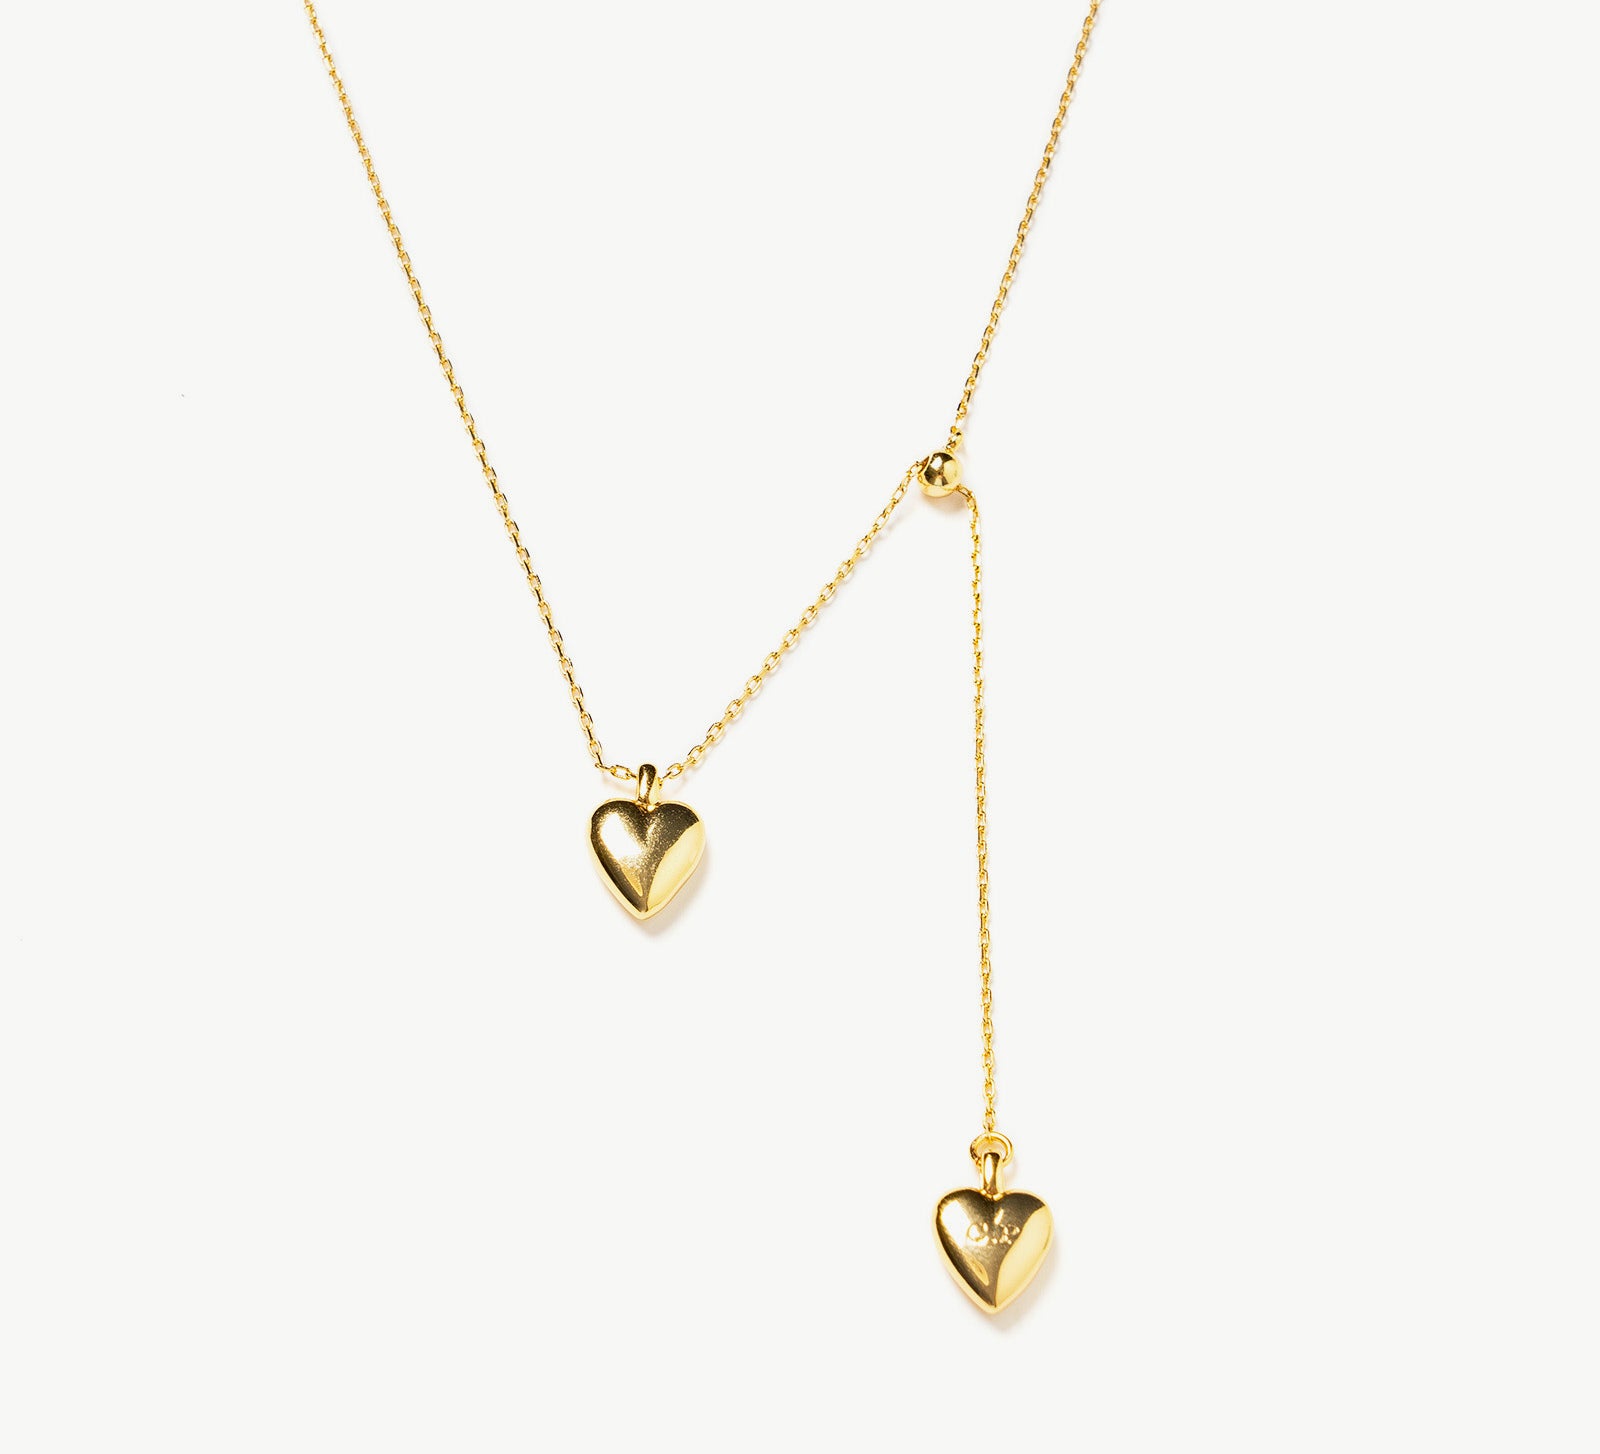 Double Heart Pendent Necklace